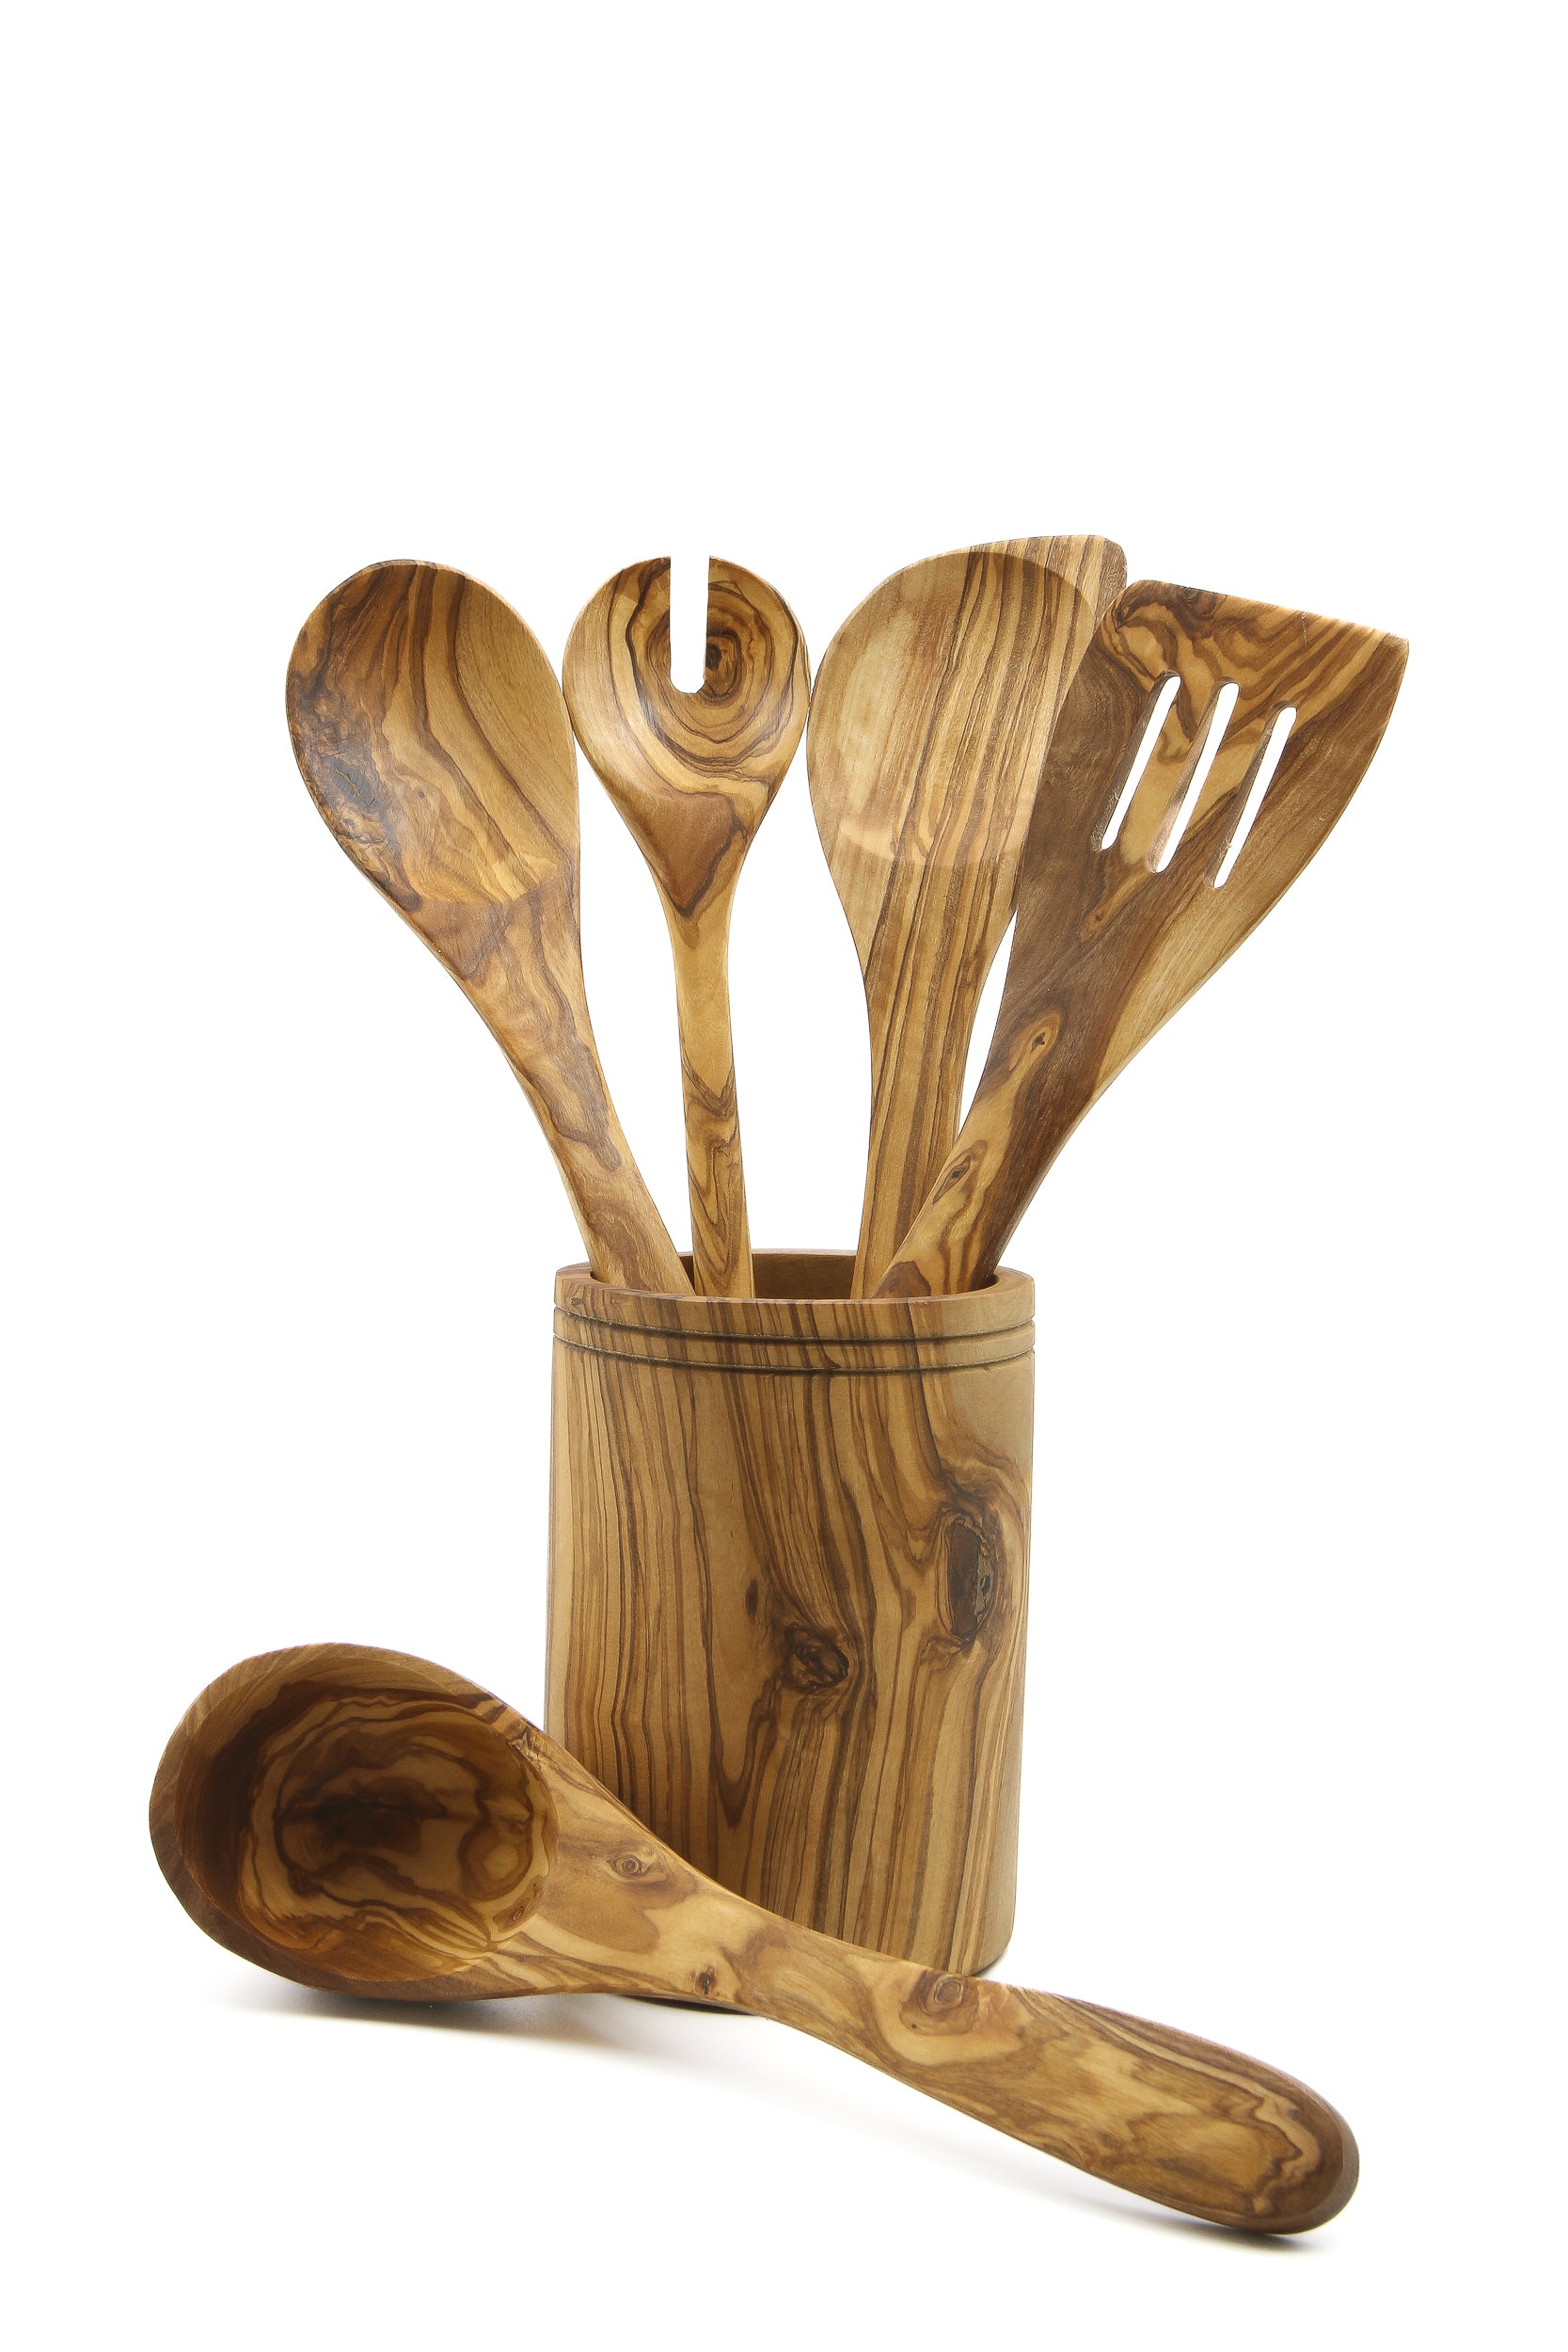 Traditional Olive Wood 5 Piece Kitchen Utensil Set Cooking Utensils Wooden  Utensils Sustainable Wood Wooden Kitchenware Home Gift 